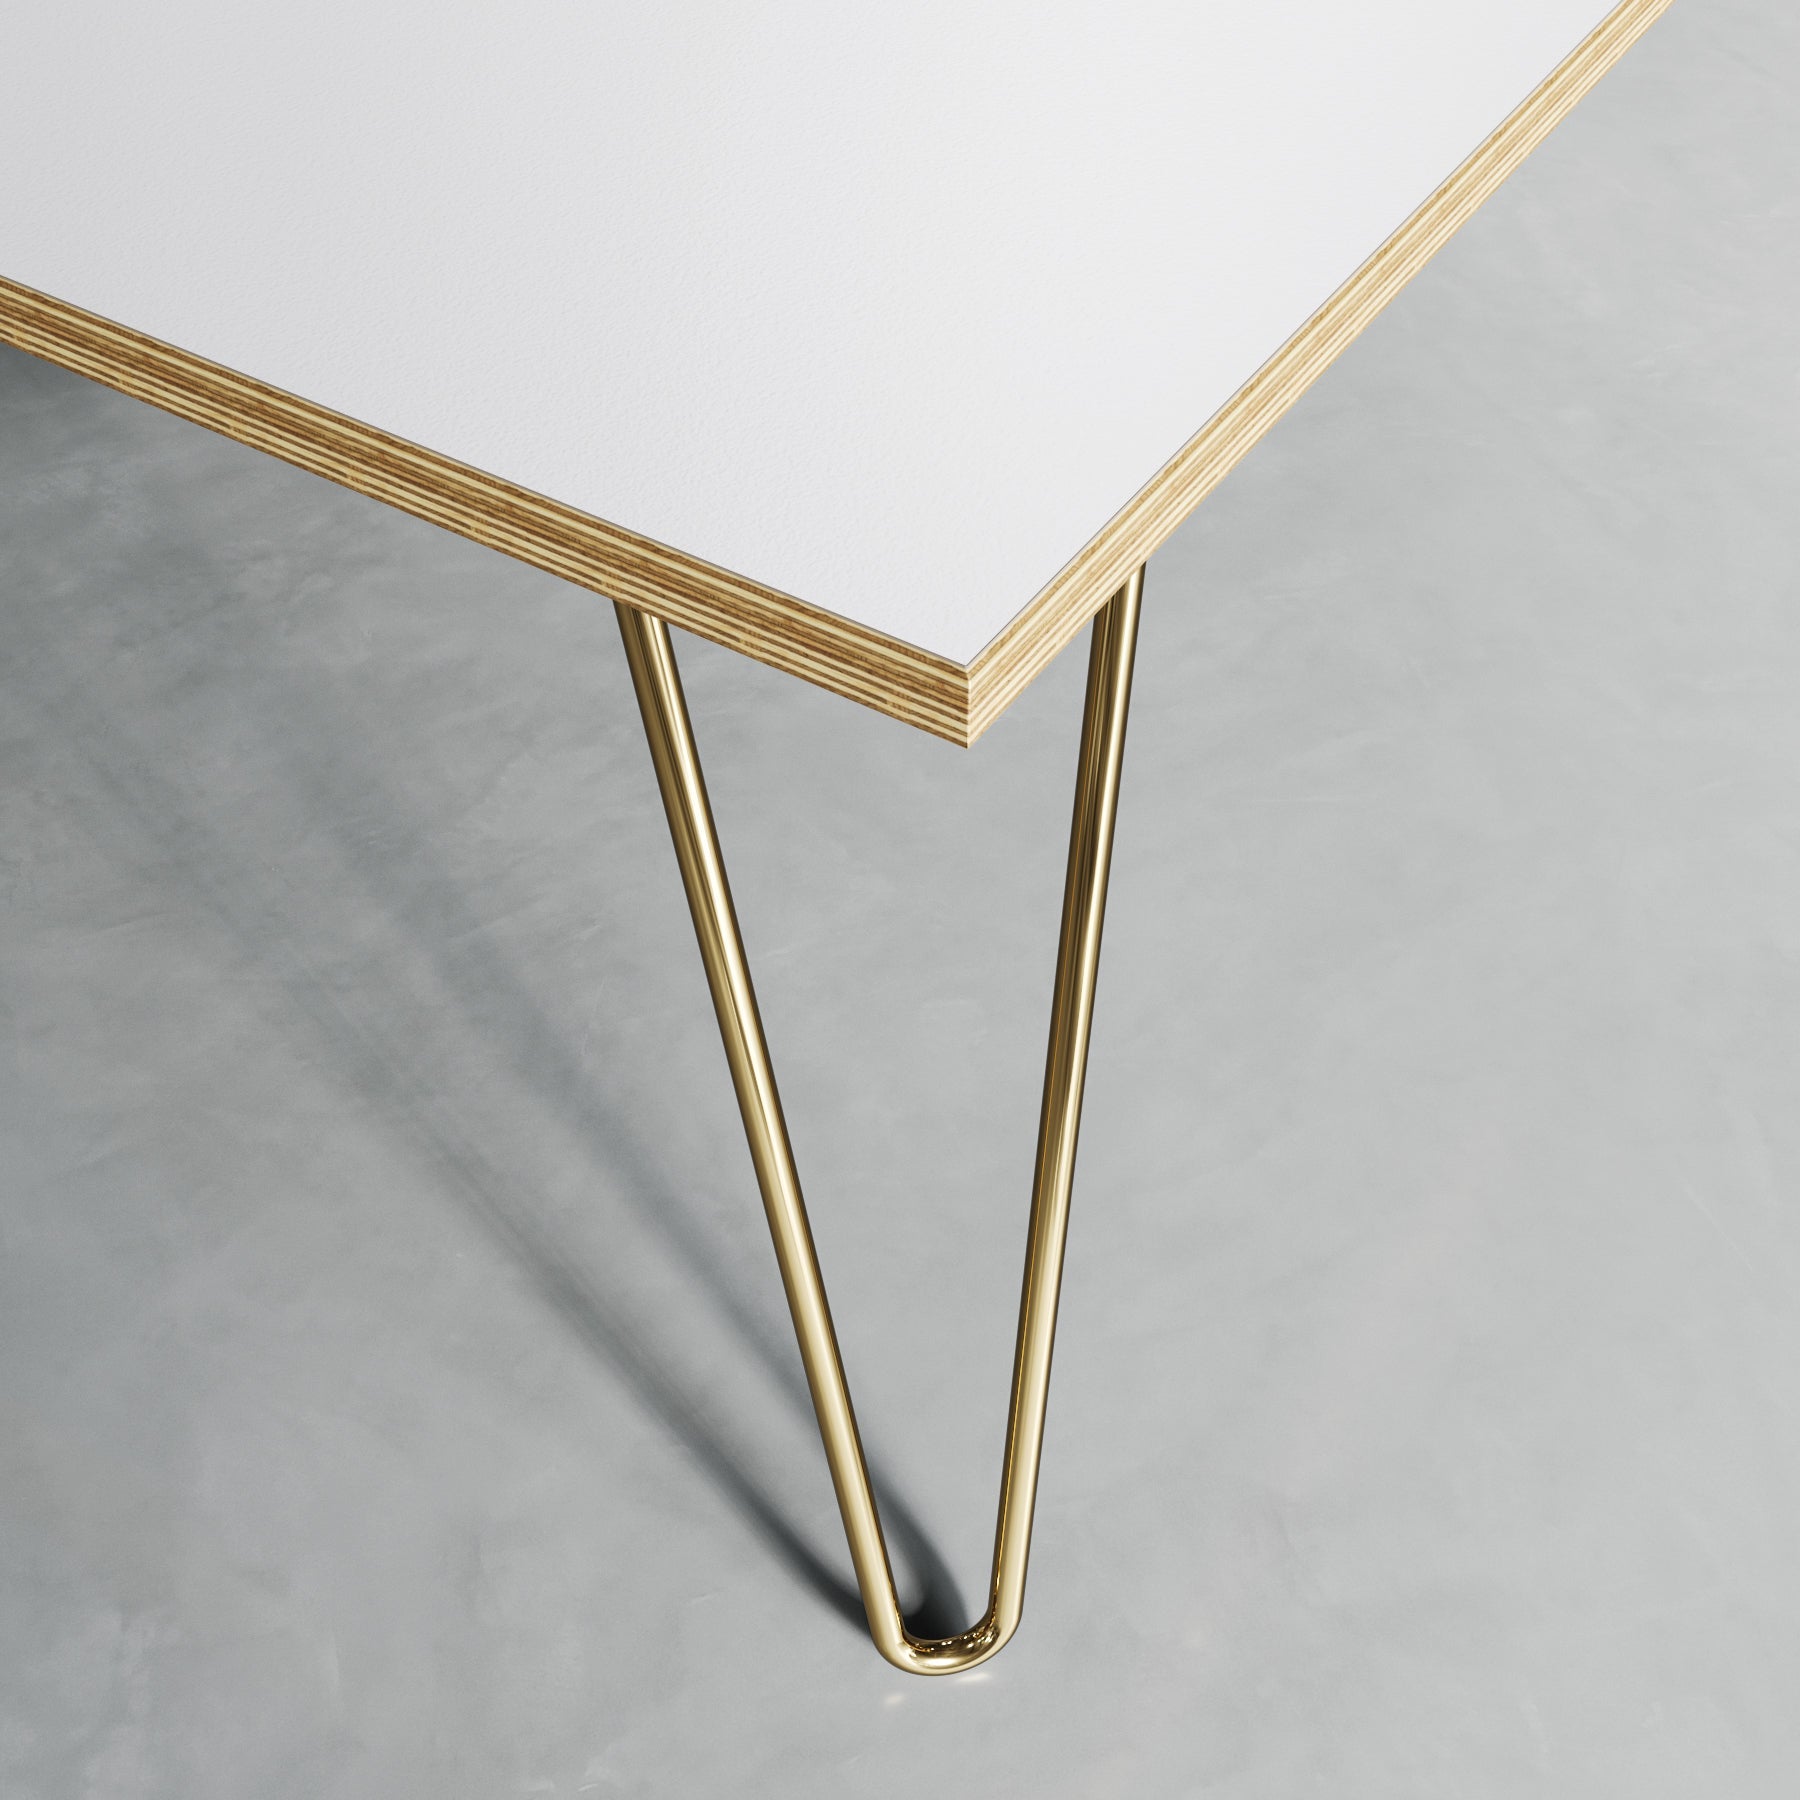 Hairpin Coffee Table-White-Gold-The Hairpin Leg Co.